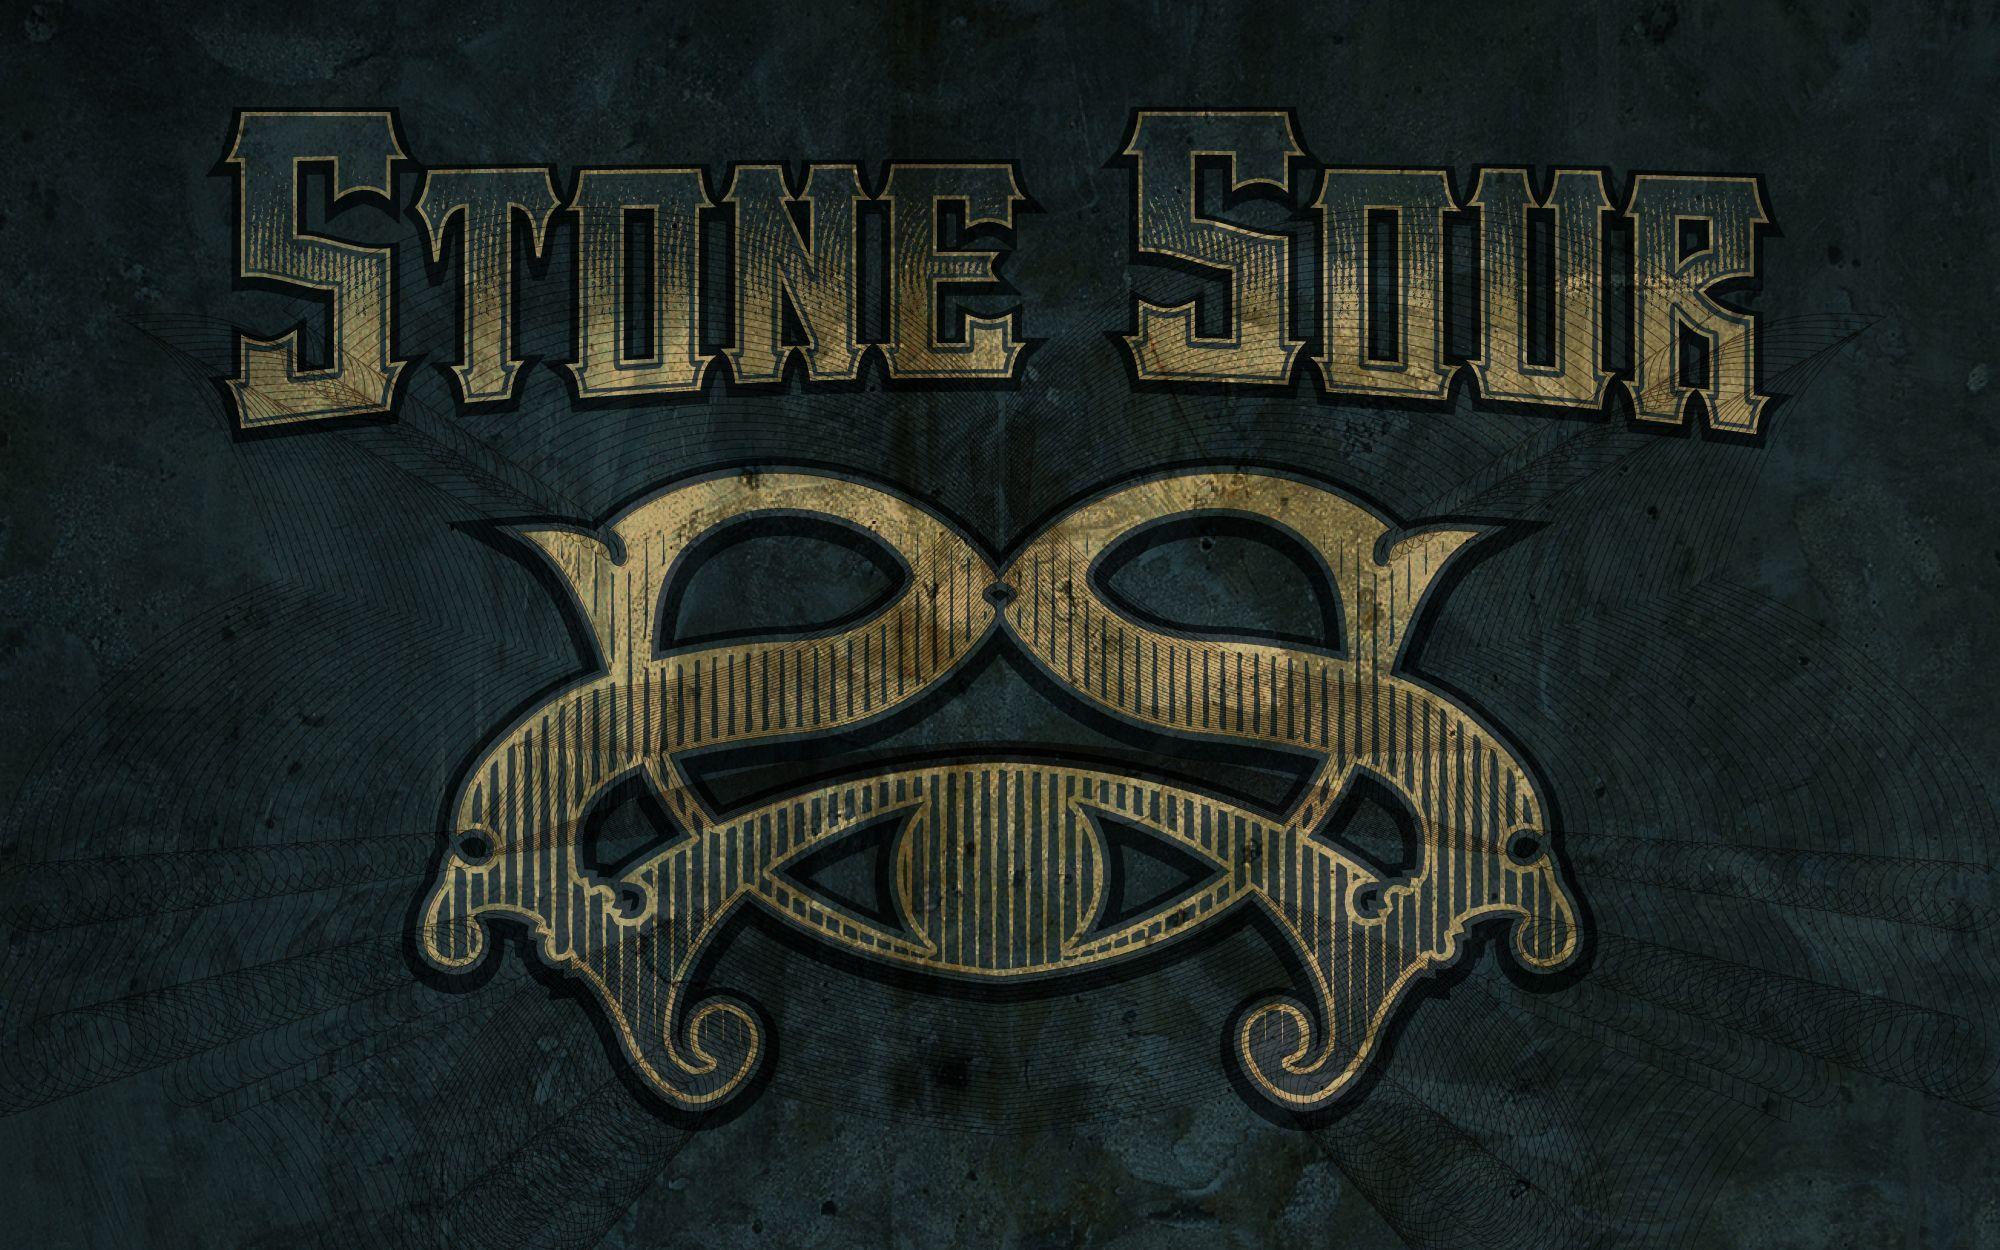 Stone Sour Logo - Stone Sour Wallpapers - Wallpaper Cave